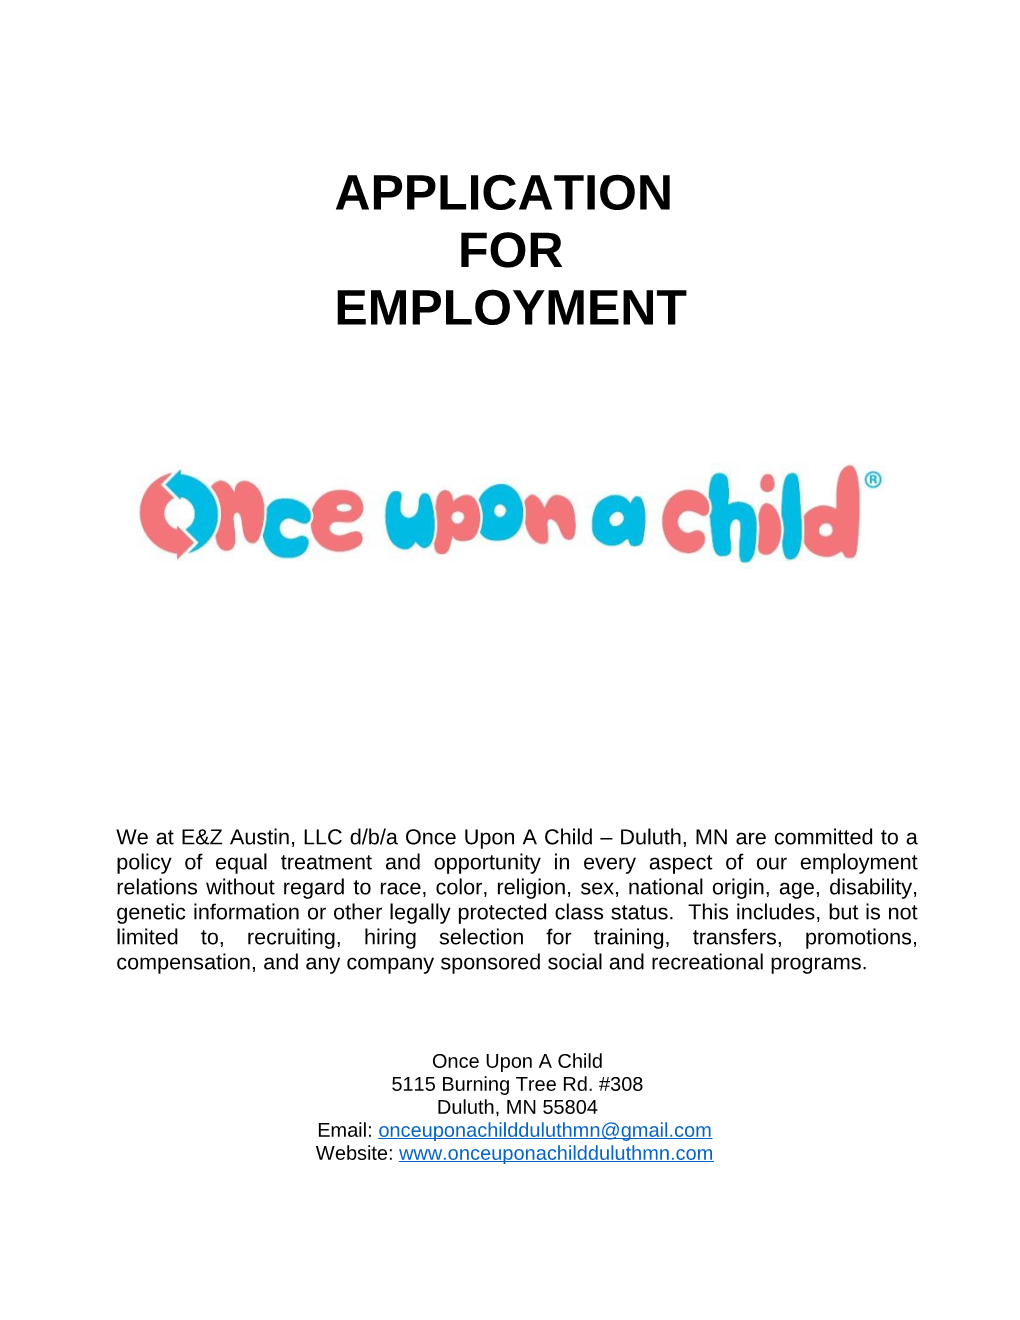 Once Upon a Child Duluth, MN * Employment Application